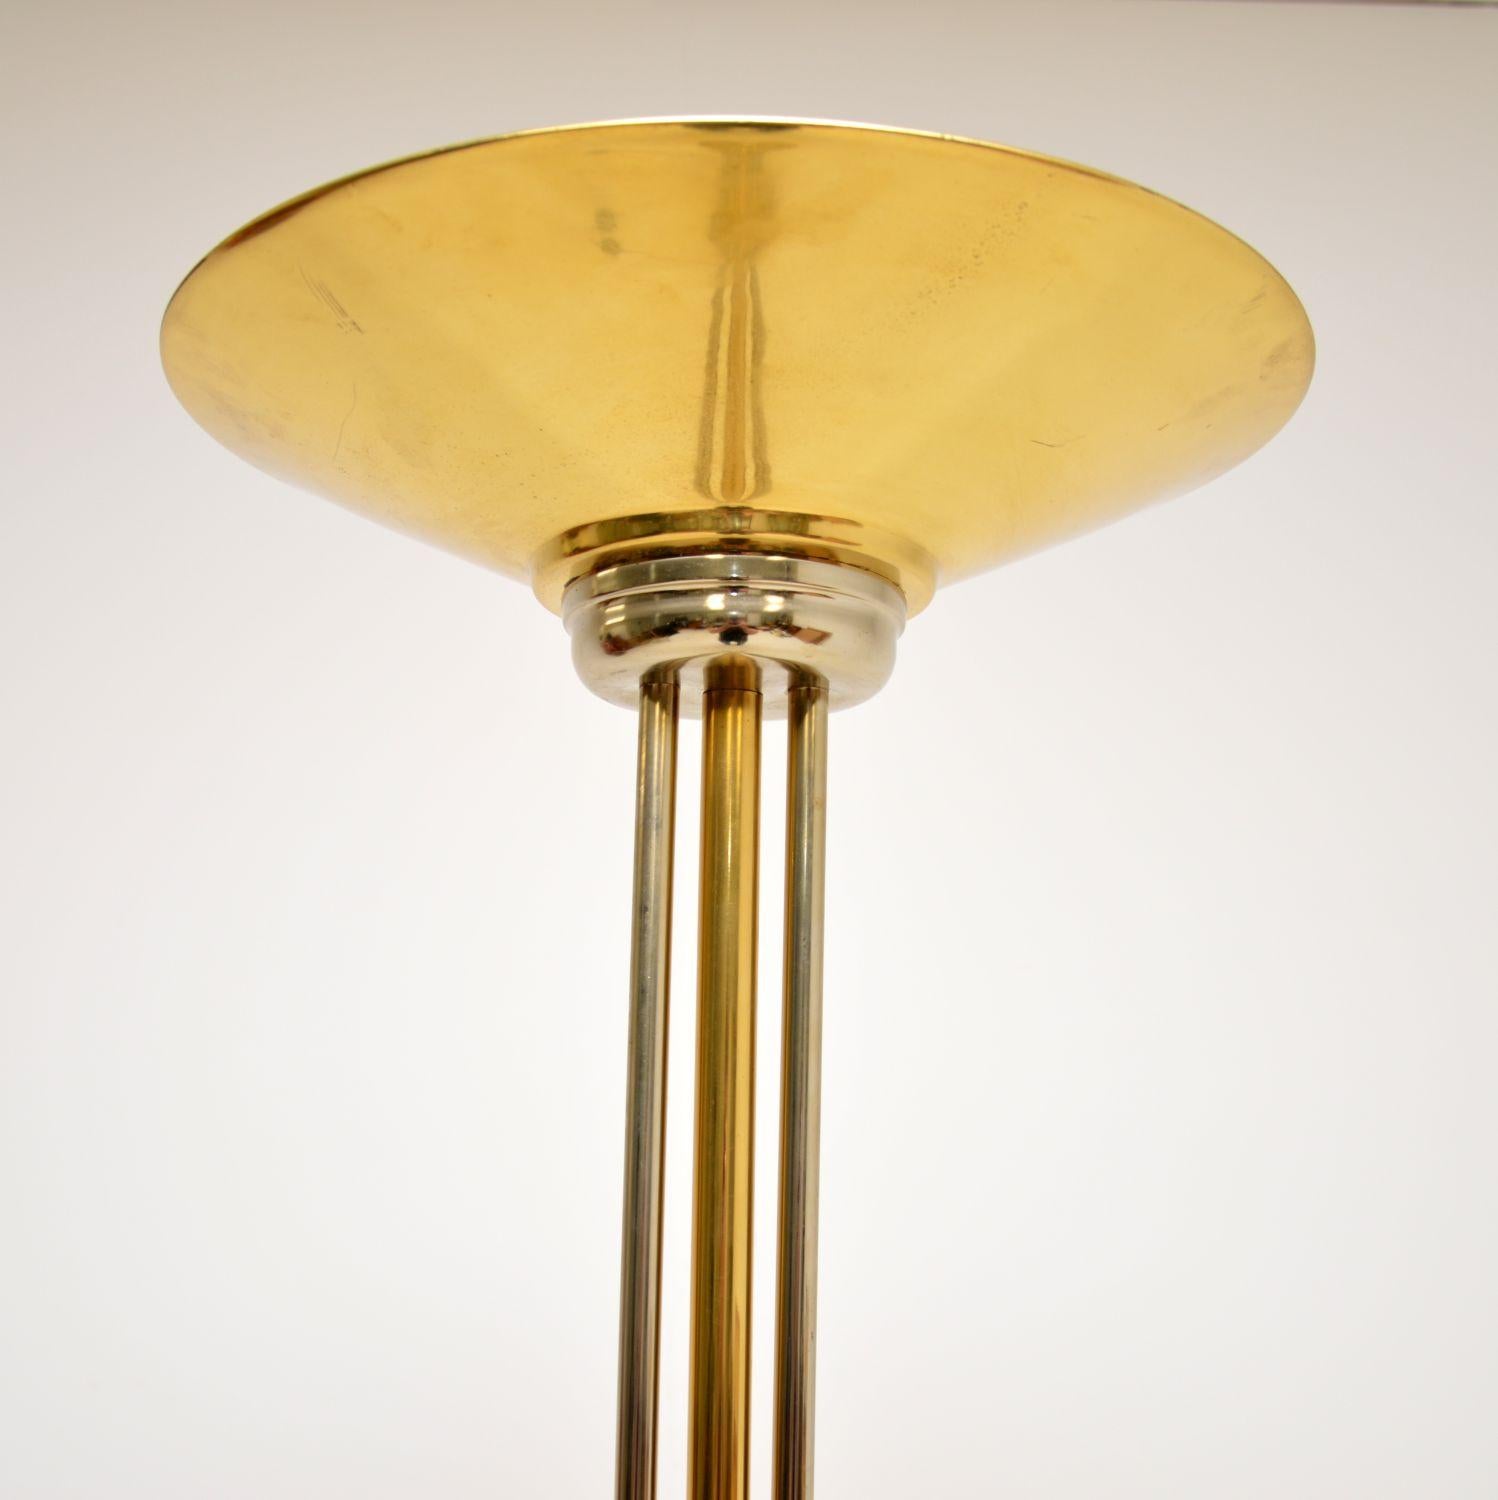 1970s Vintage Italian Brass & Chrome Floor Lamp In Good Condition For Sale In London, GB